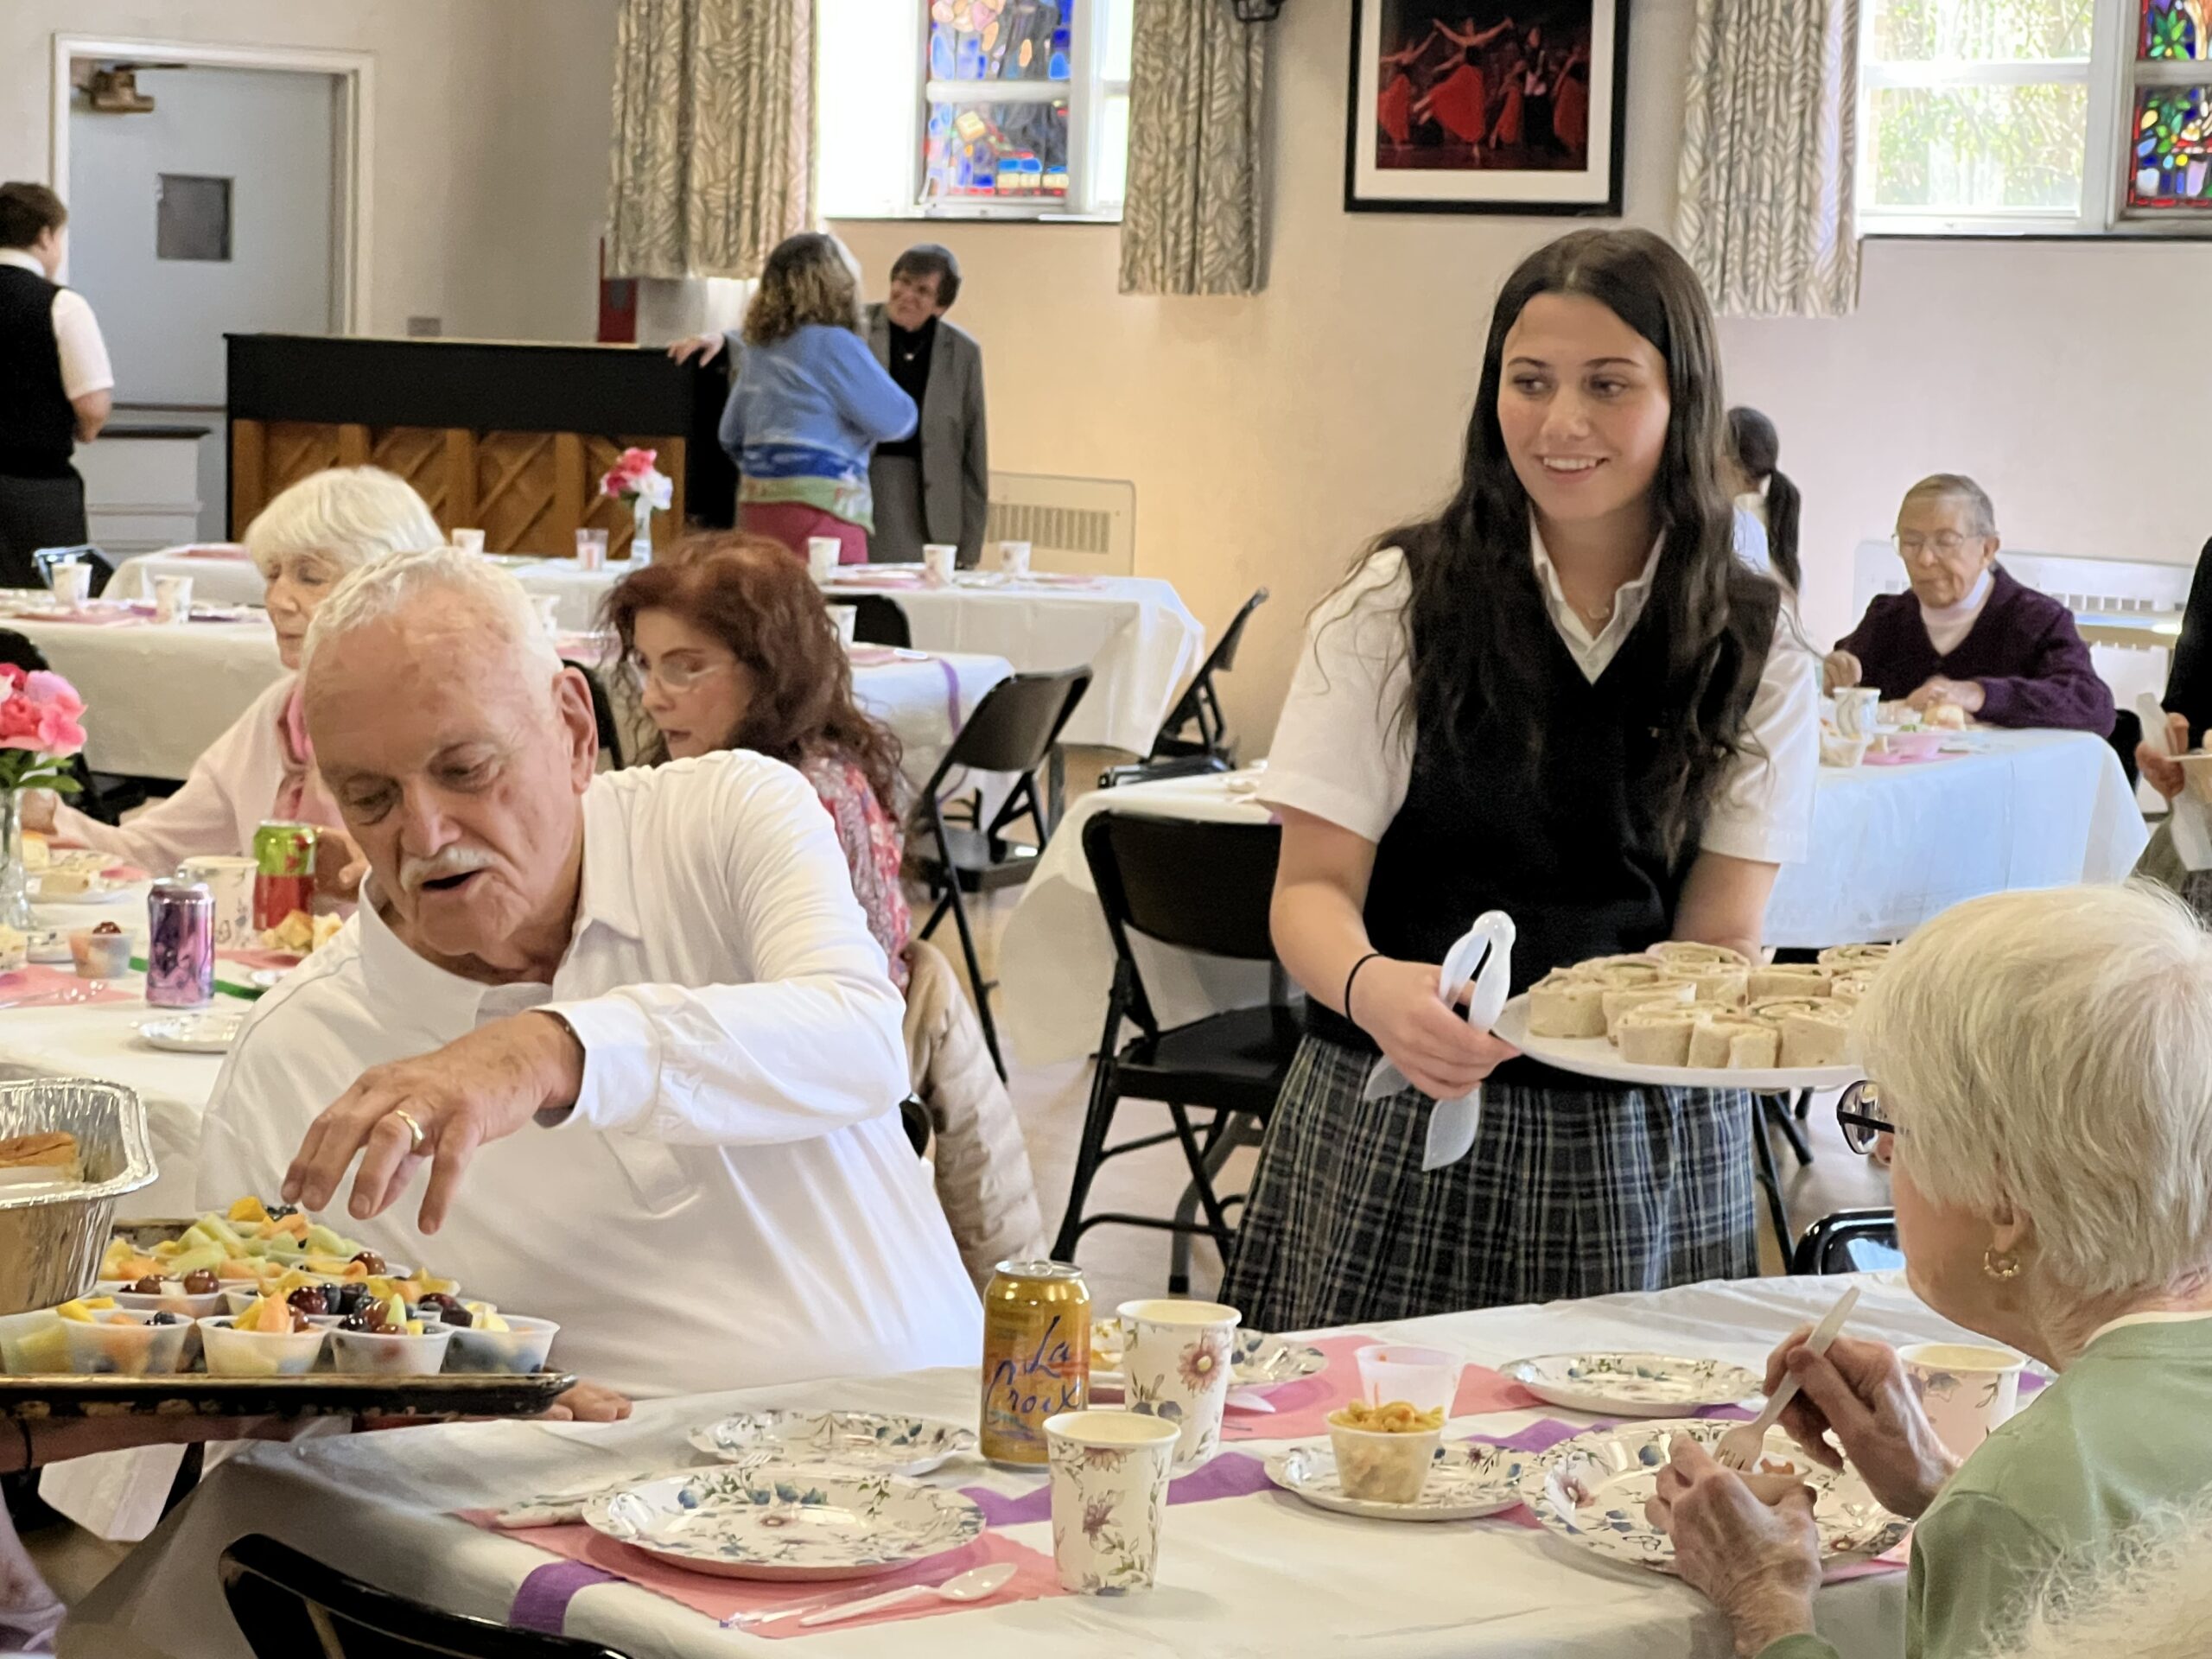 Prep 8 students at Our Lady of the Hamptons School prepared and served a lunch recently to senior citizens at the school.  COURTESY OUR LADY OF THE HAMPTONS